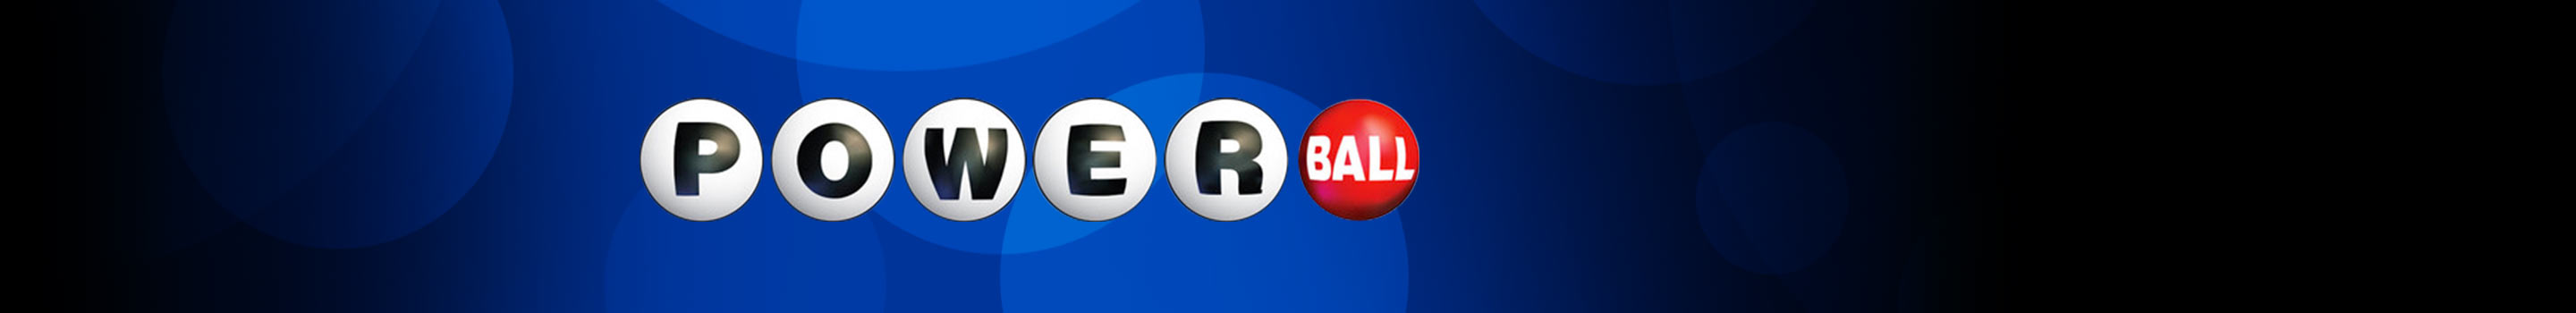 Powerball – the biggest lottery in the world